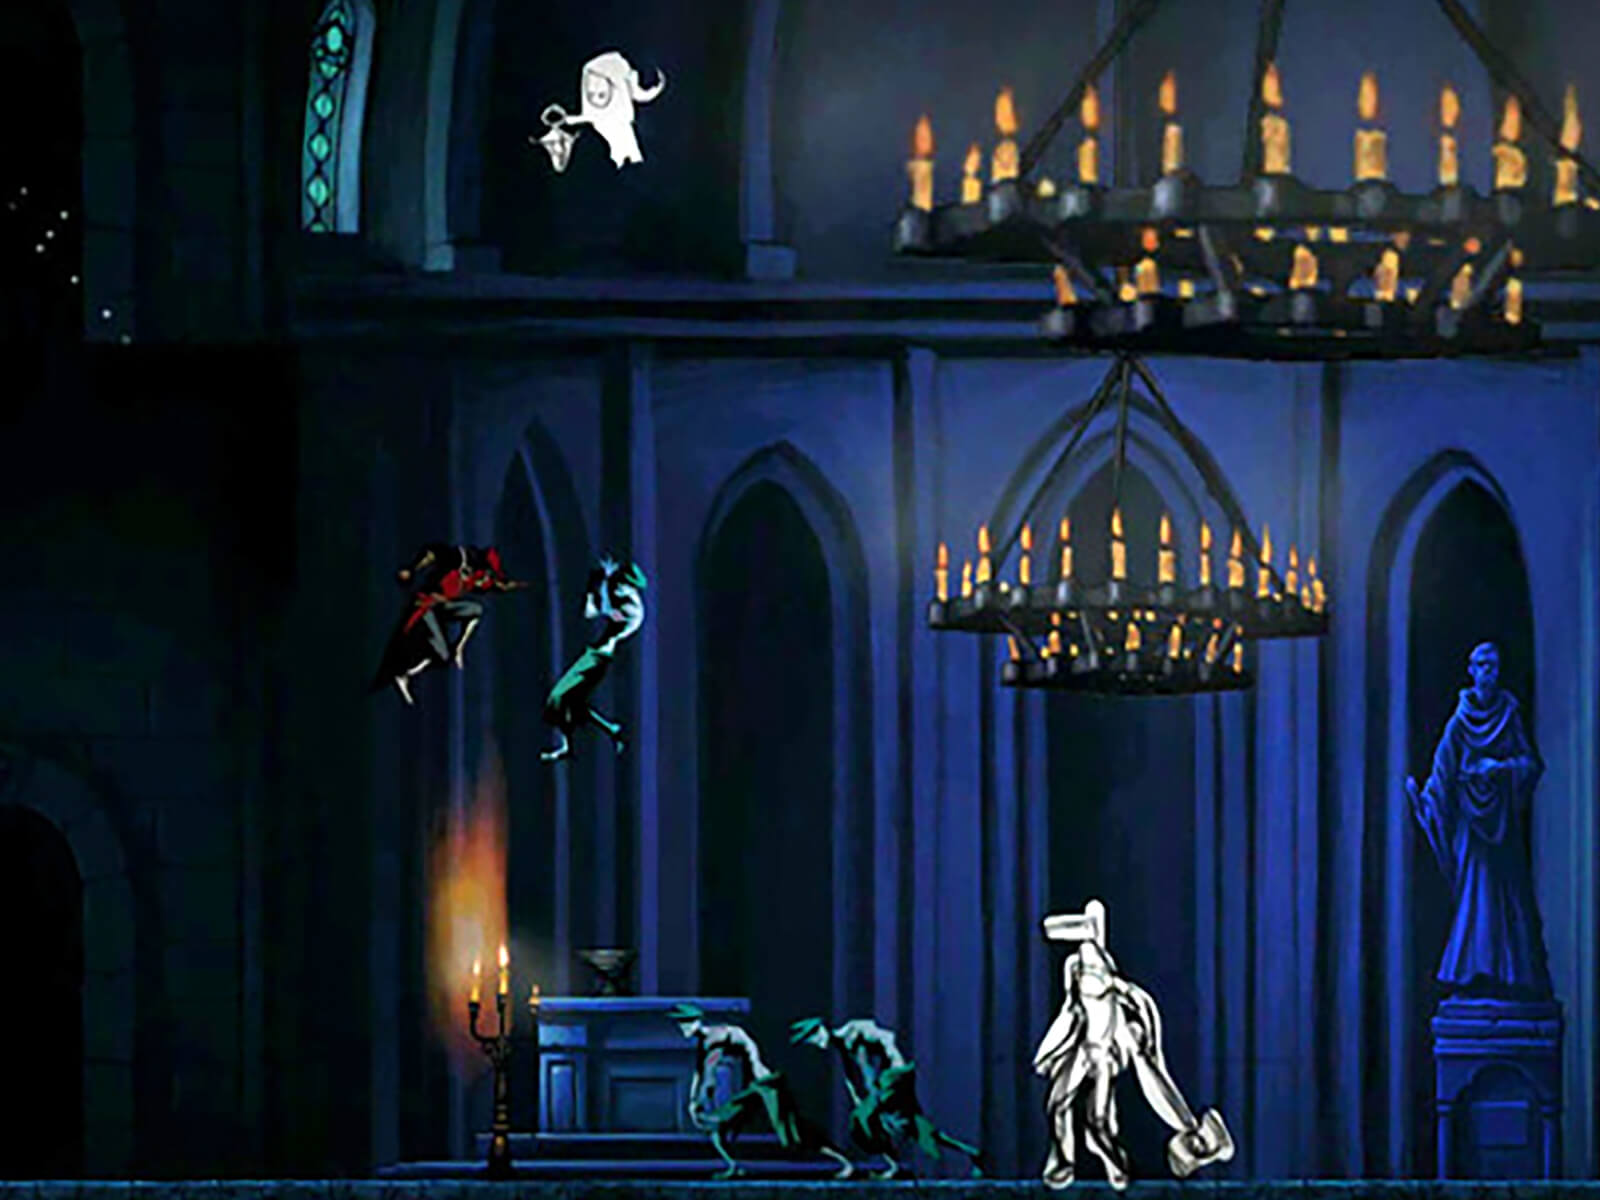 A swordsman in red fights a green zombie in midair in a spooky church